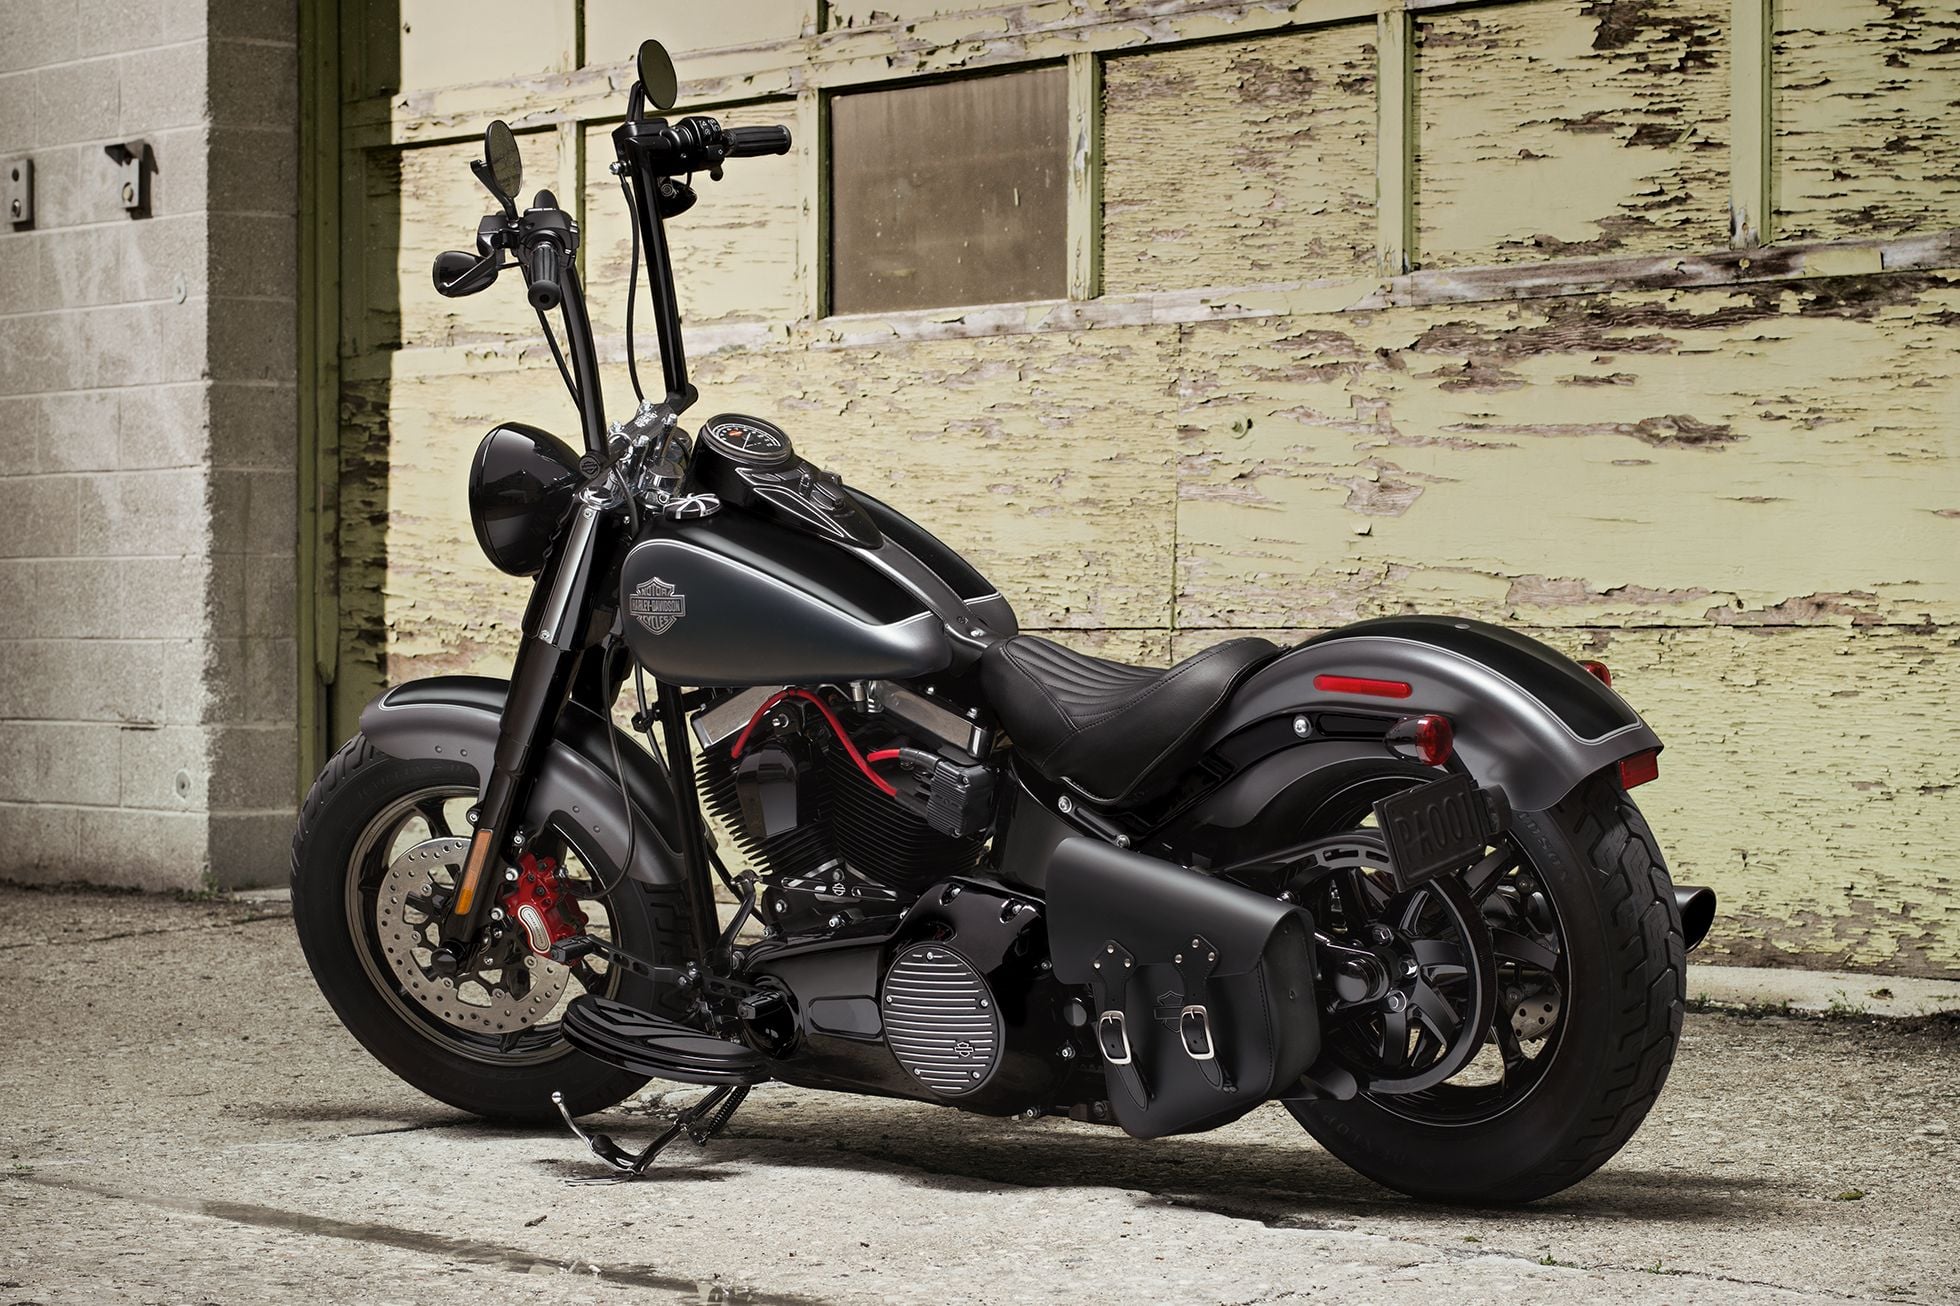 Harley Davidson Softail: Top 5 Modifications | Hdforums